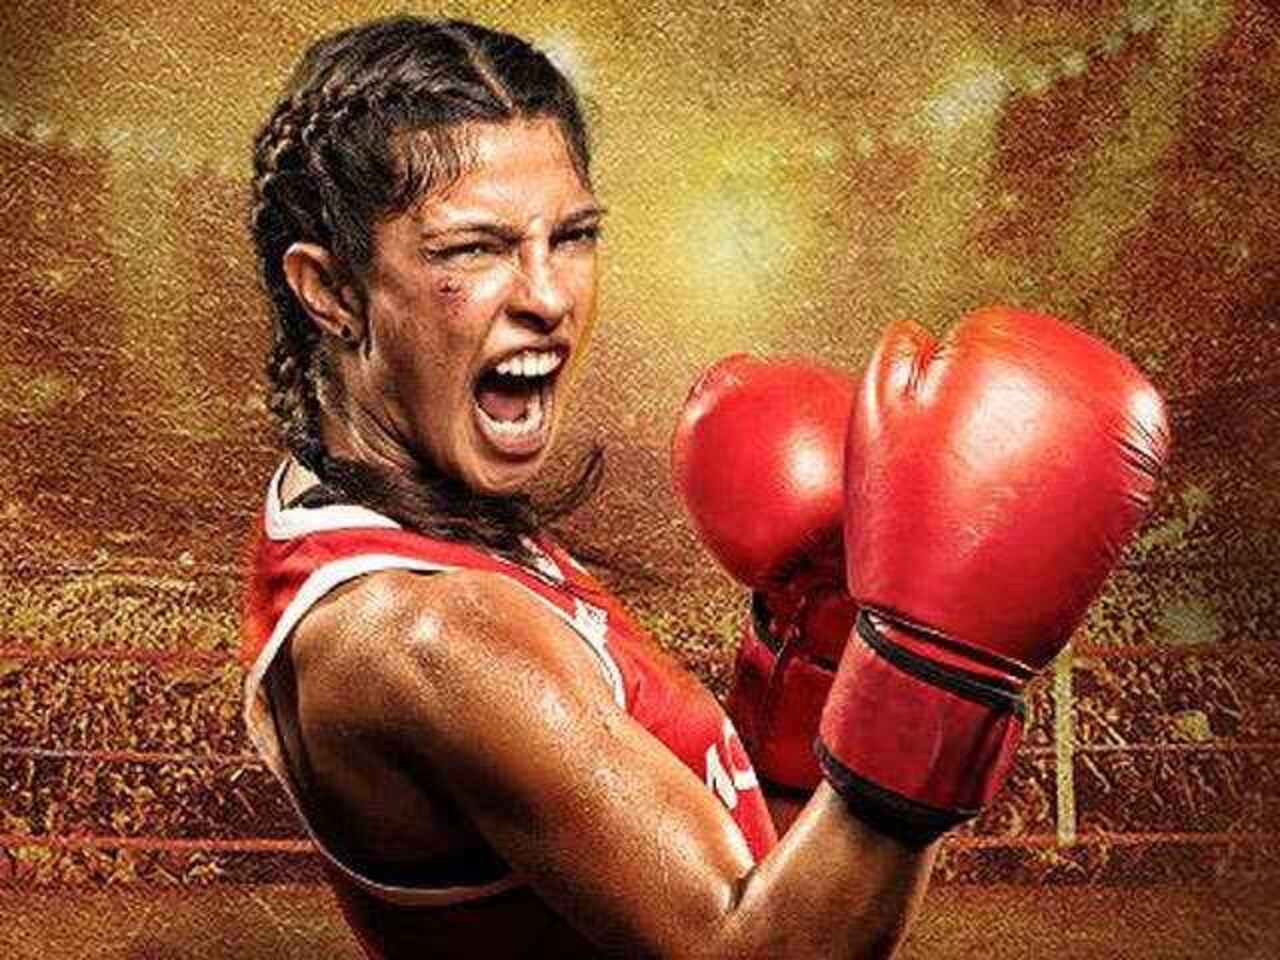 'Mary Kom' is a biographical sports drama starring Priyanka Chopra in the titular role. The movie follows the life of Mary Kom, an Indian boxer, and Olympic bronze medalist